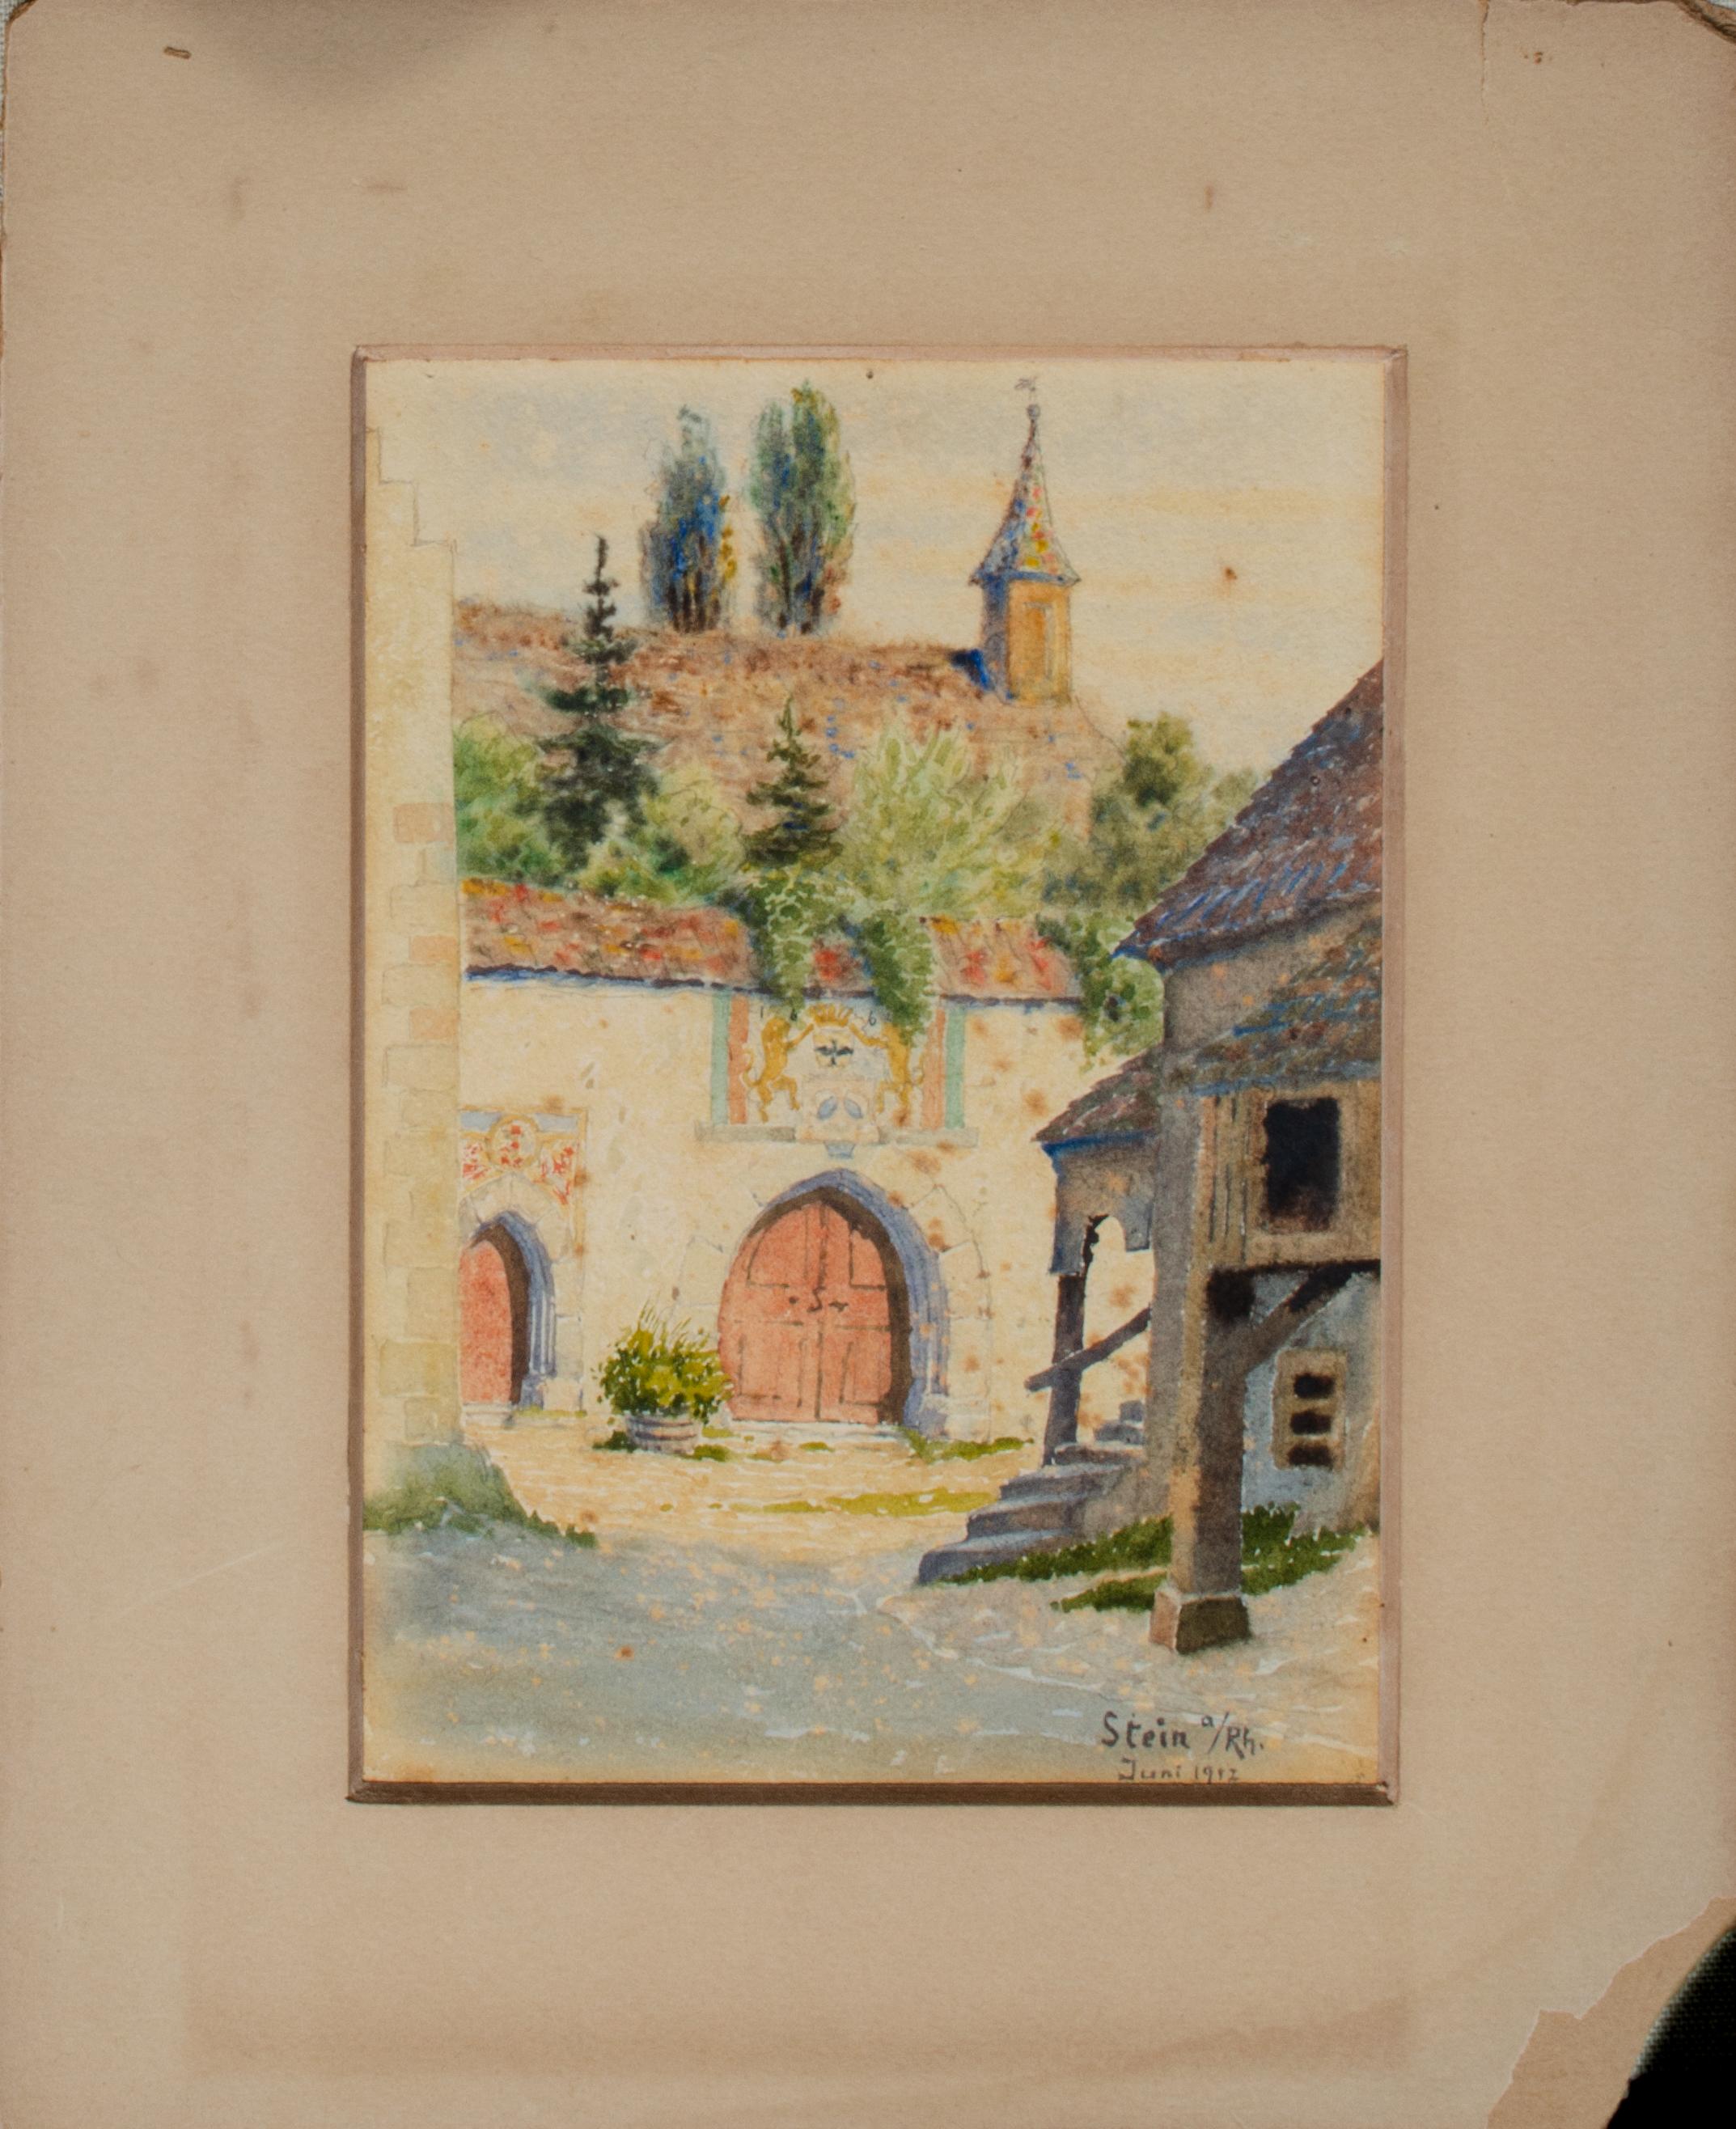 Stein am Rhine, 1912
Watercolor on paper
7 x 5 in.
Mat: 10 3/4 x 8 3/4 in.
Inscribed lower right: Stein a/Rh, Juni 1912

At the point where Lake Constance again becomes the Rhine River, you will find the little town of Stein am Rhein. It is famous